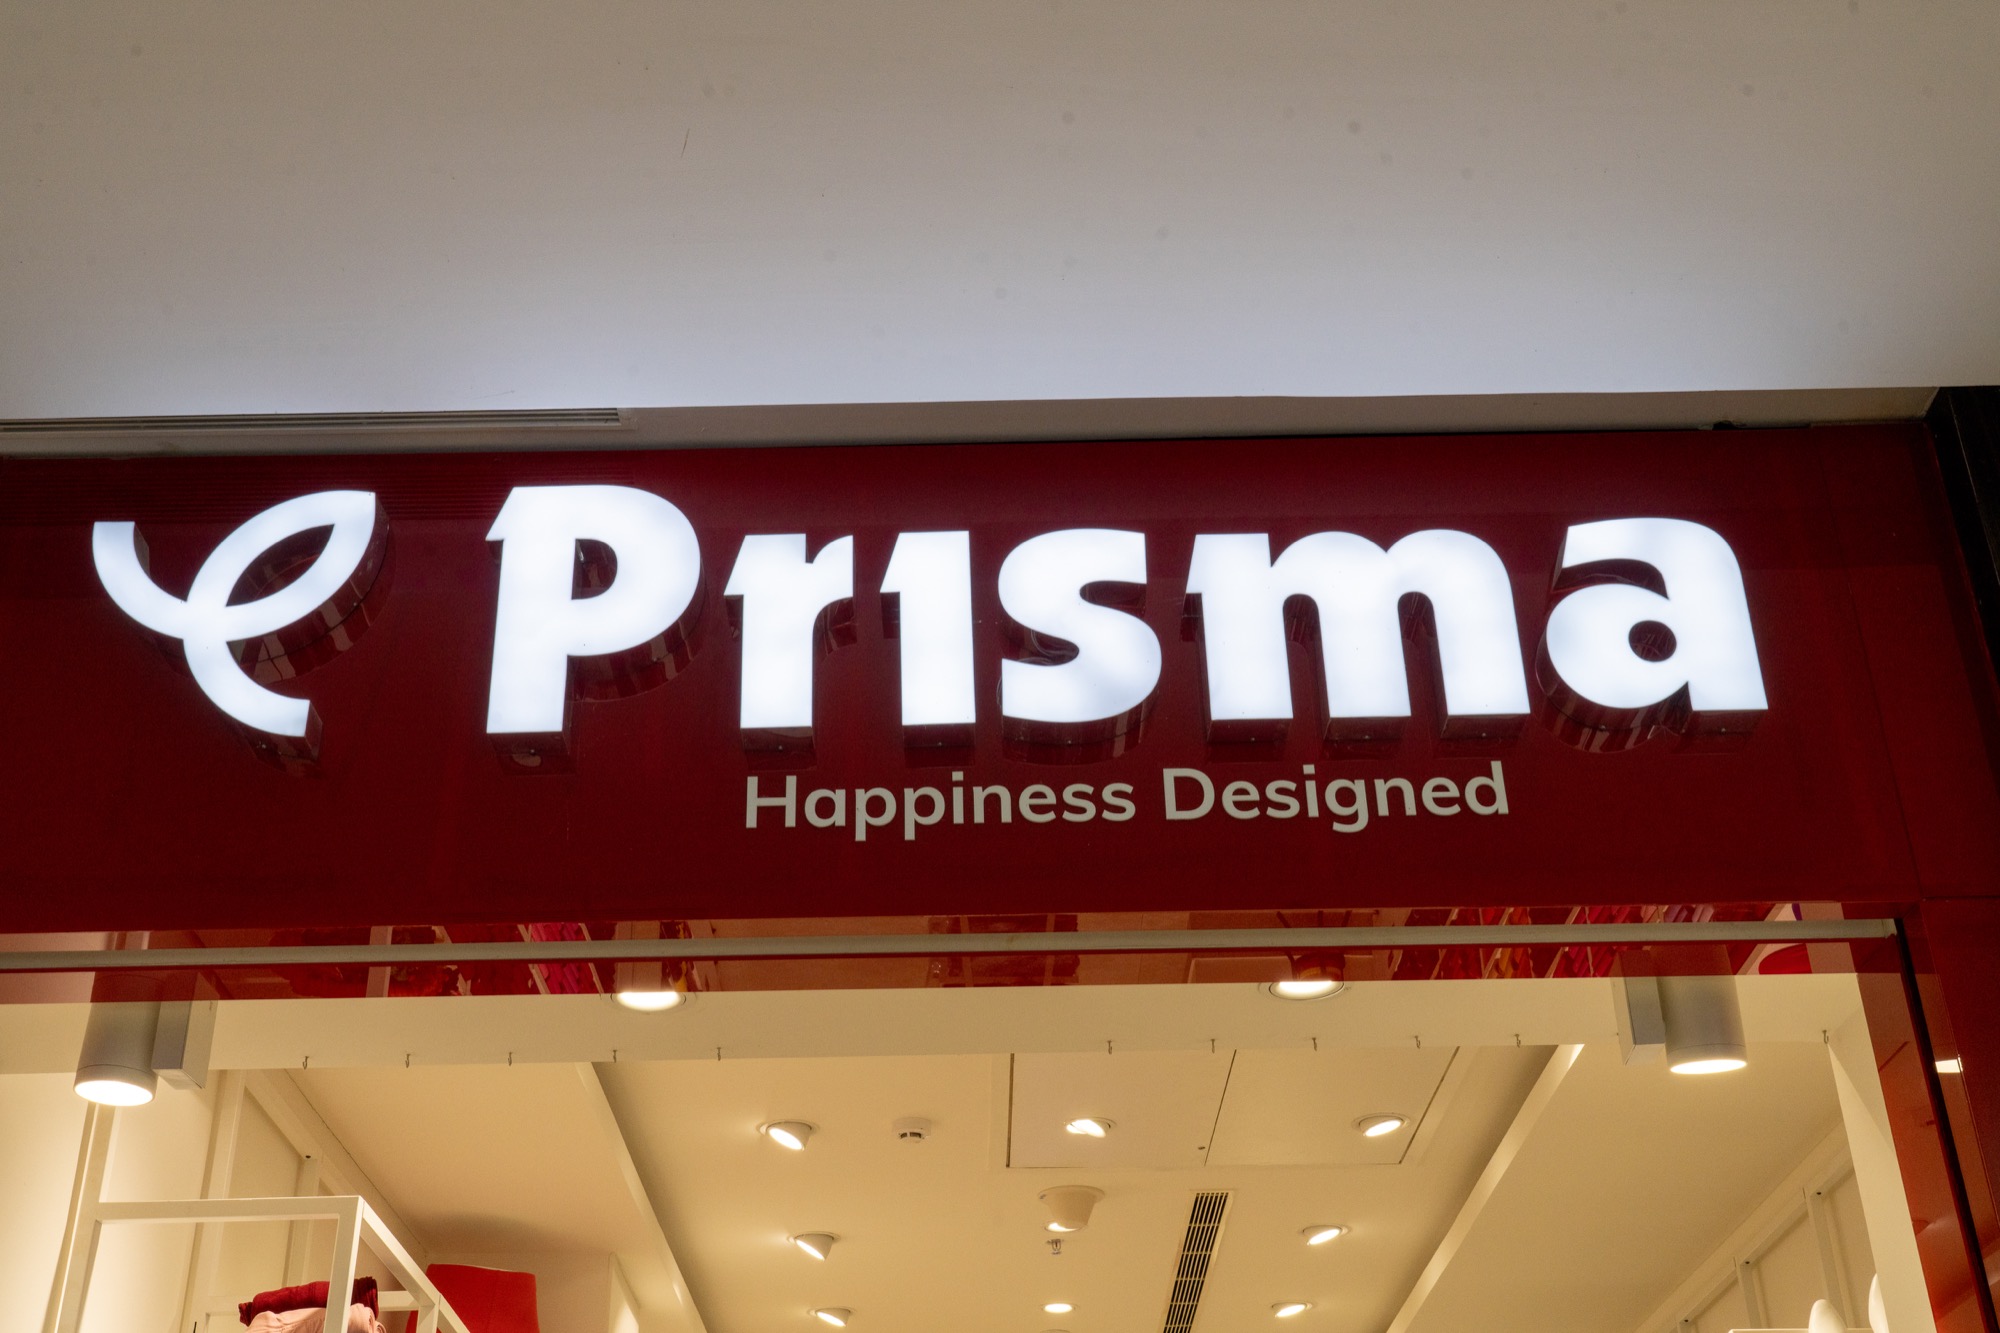 Prisma at Next Musarambagh: Fashionable Clothing and Accessories for Every  Style